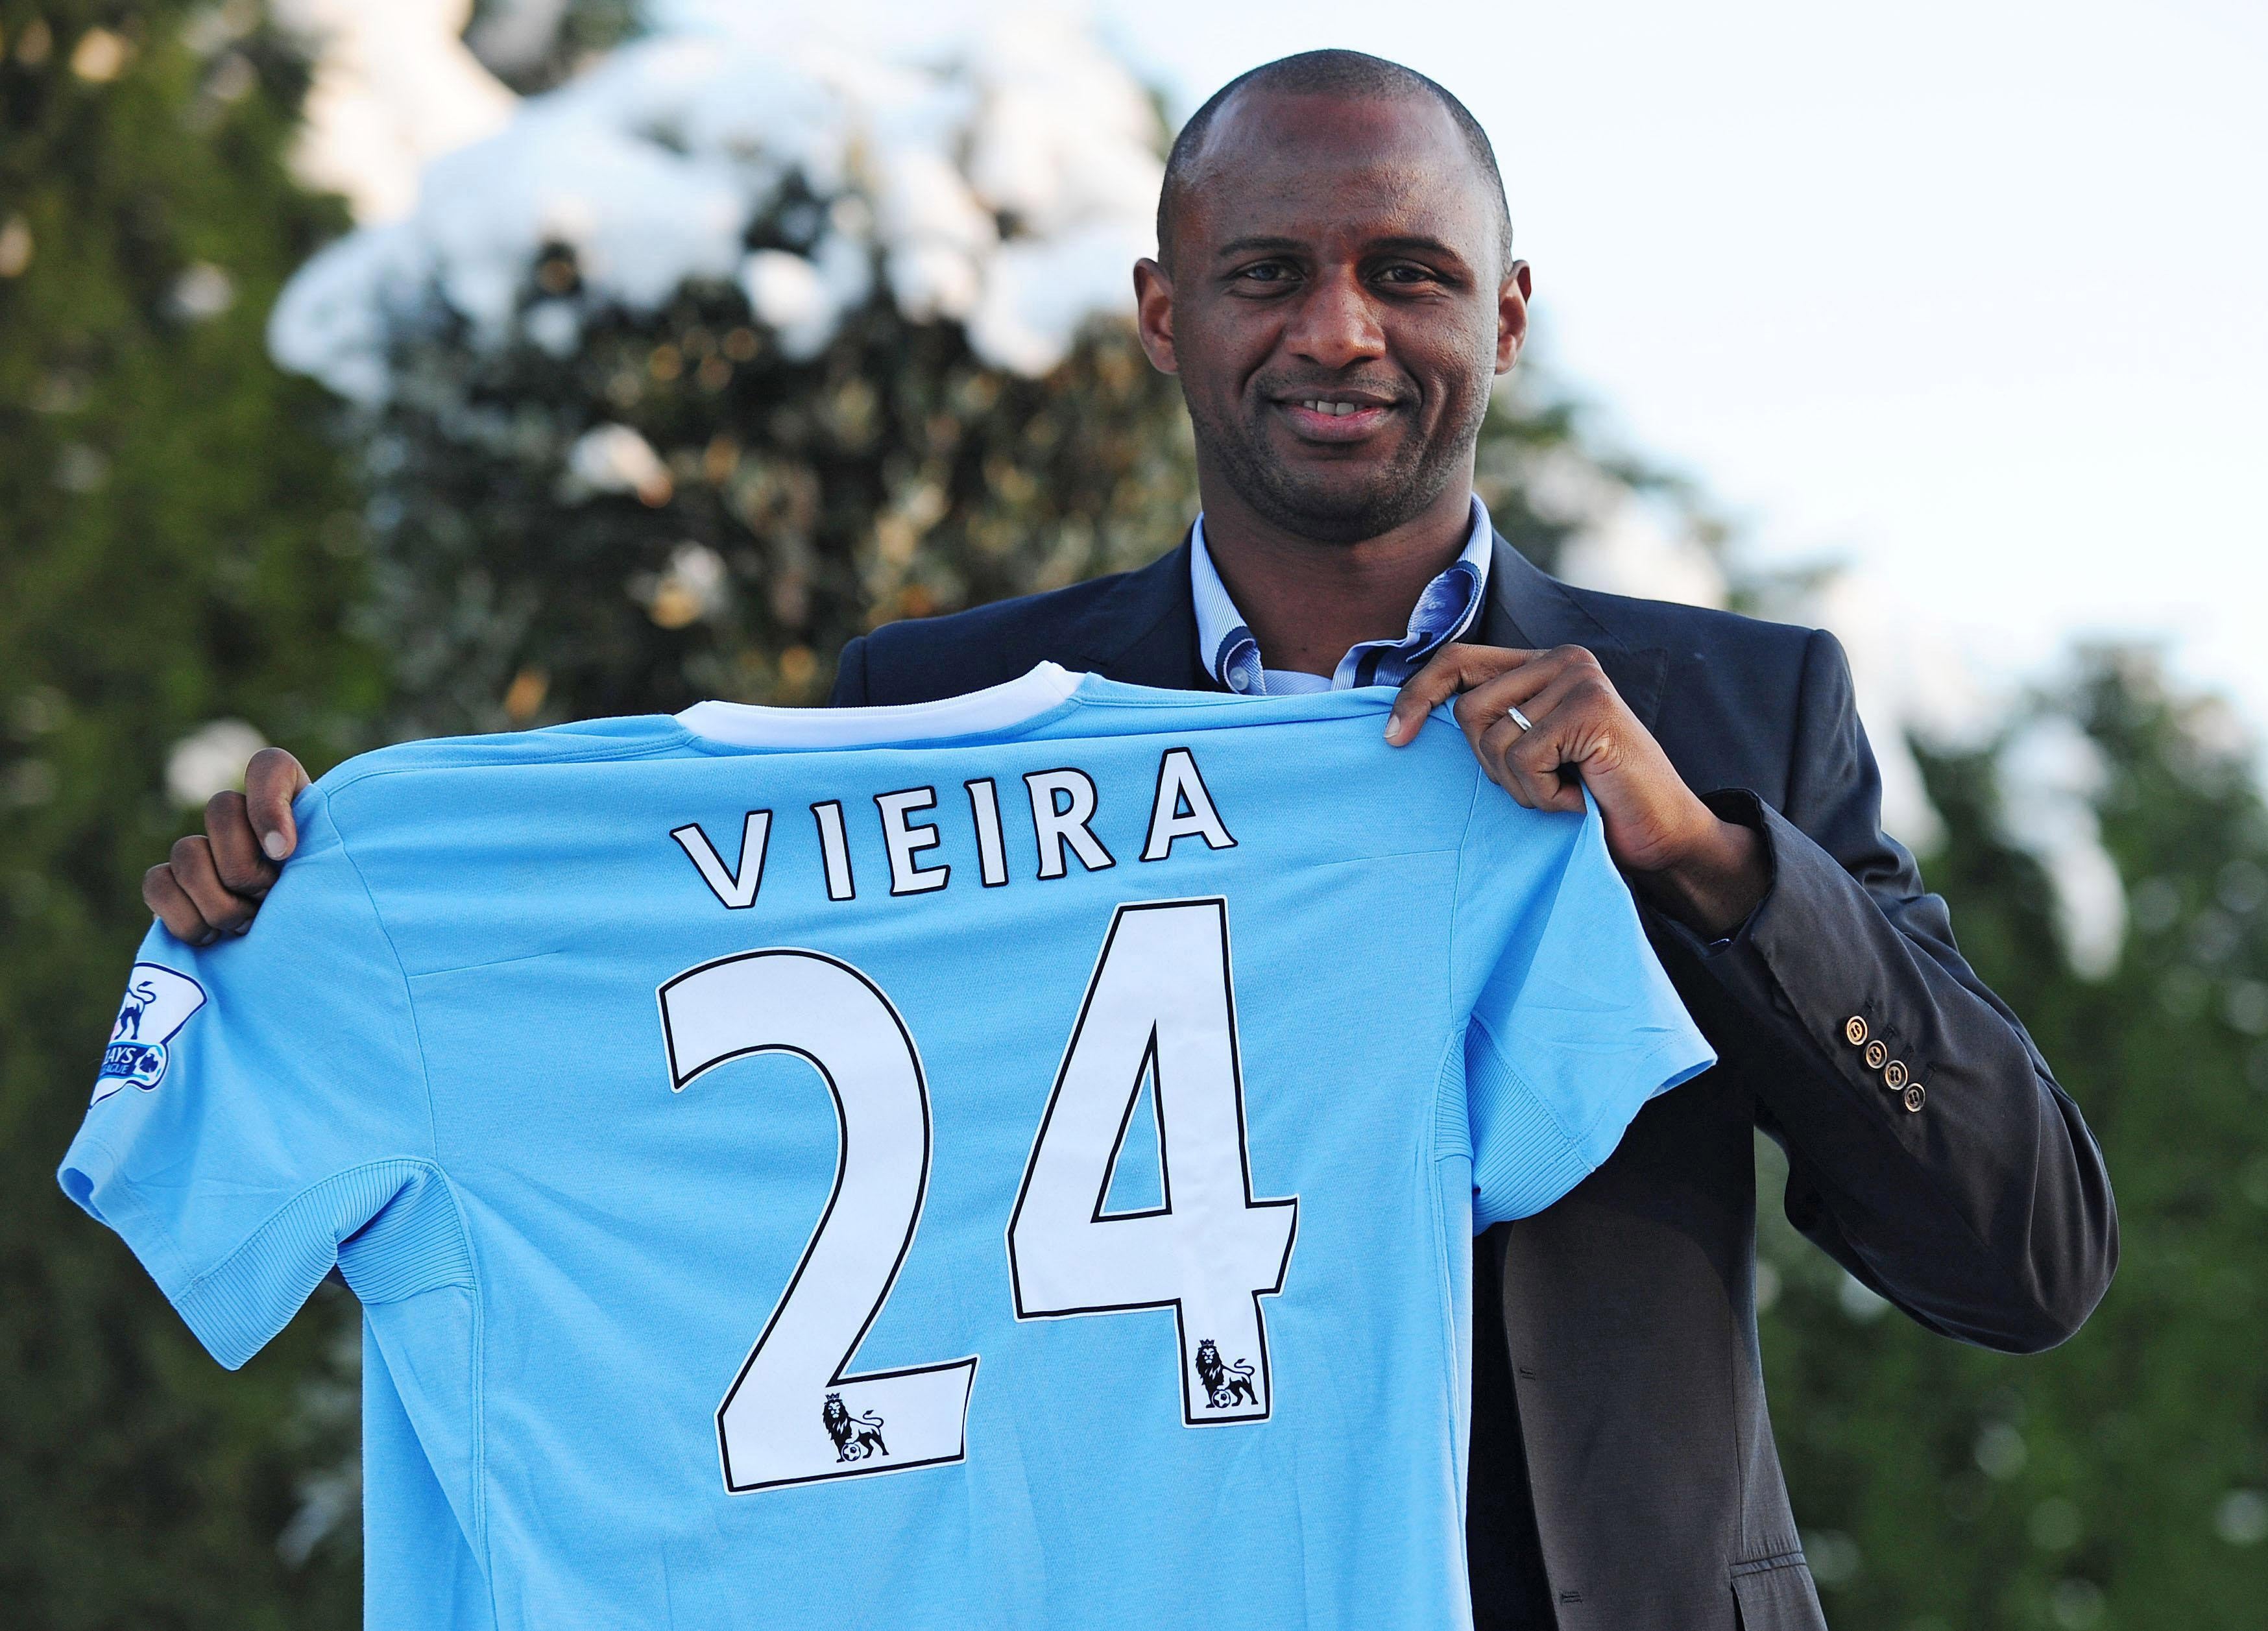 Patrick Vieira finished his playing career at City before coaching the club’s development squad (Anna Gowthorpe/PA)